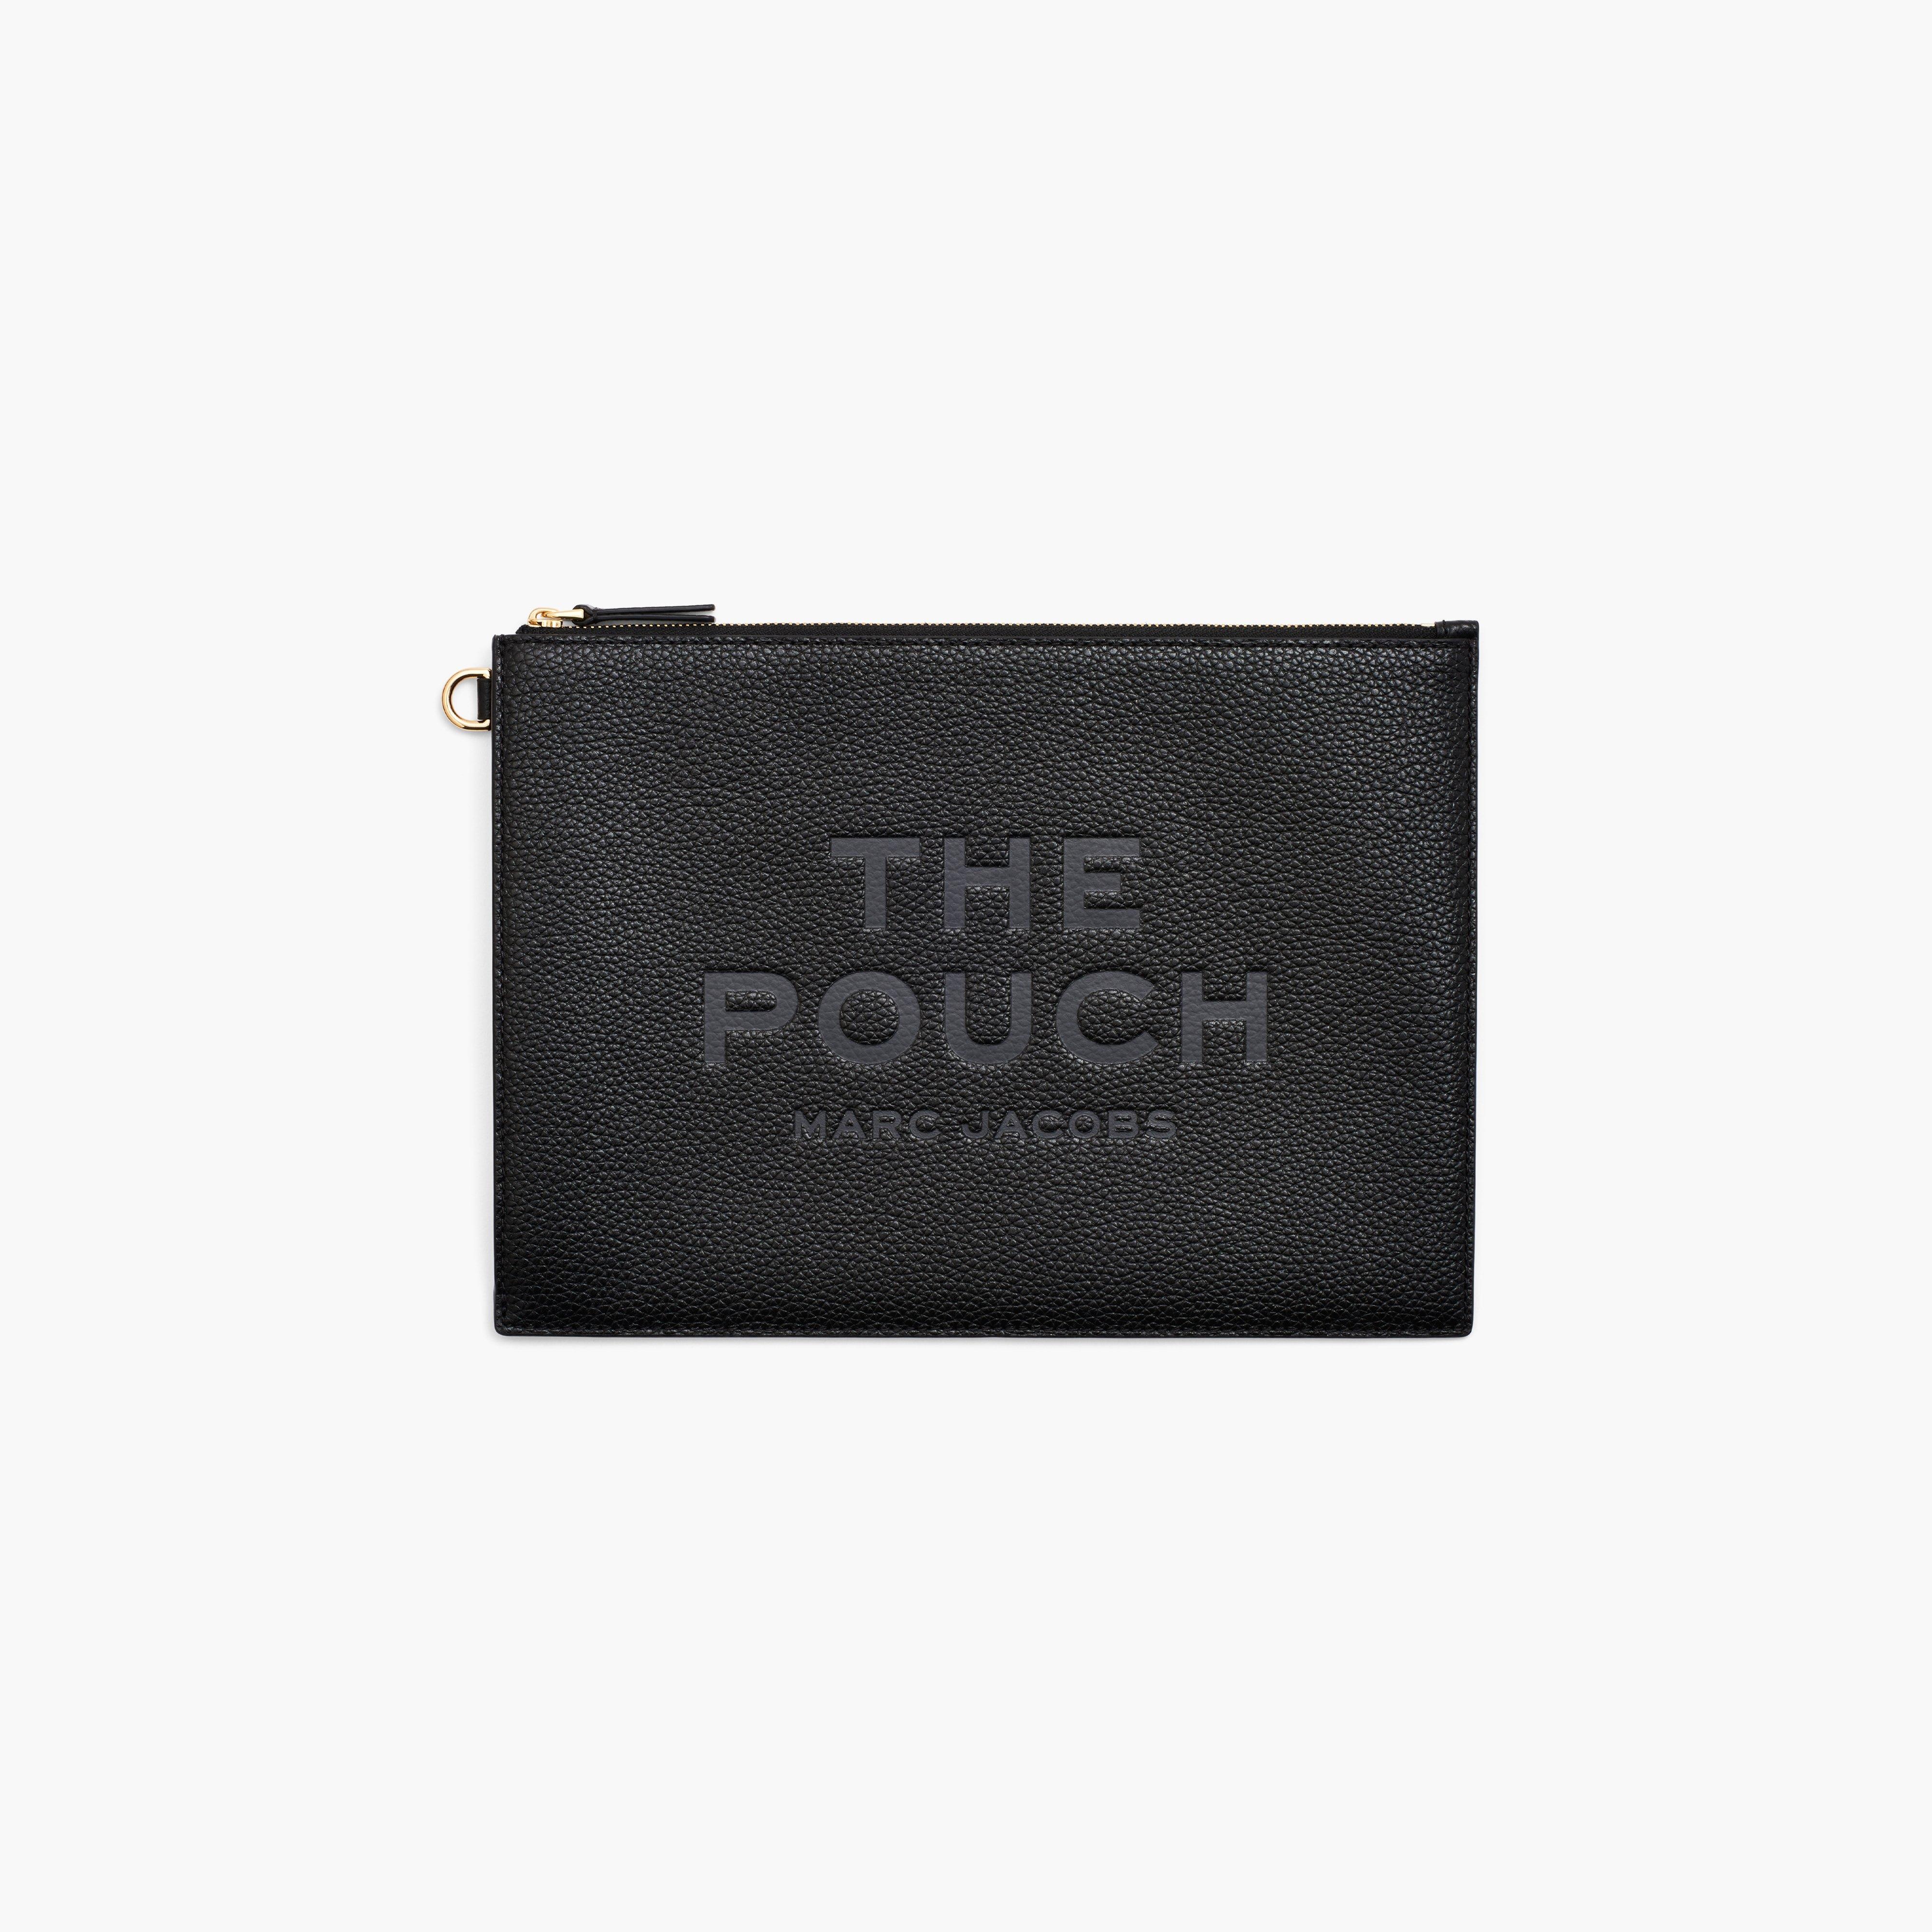 THE LEATHER LARGE POUCH - 2